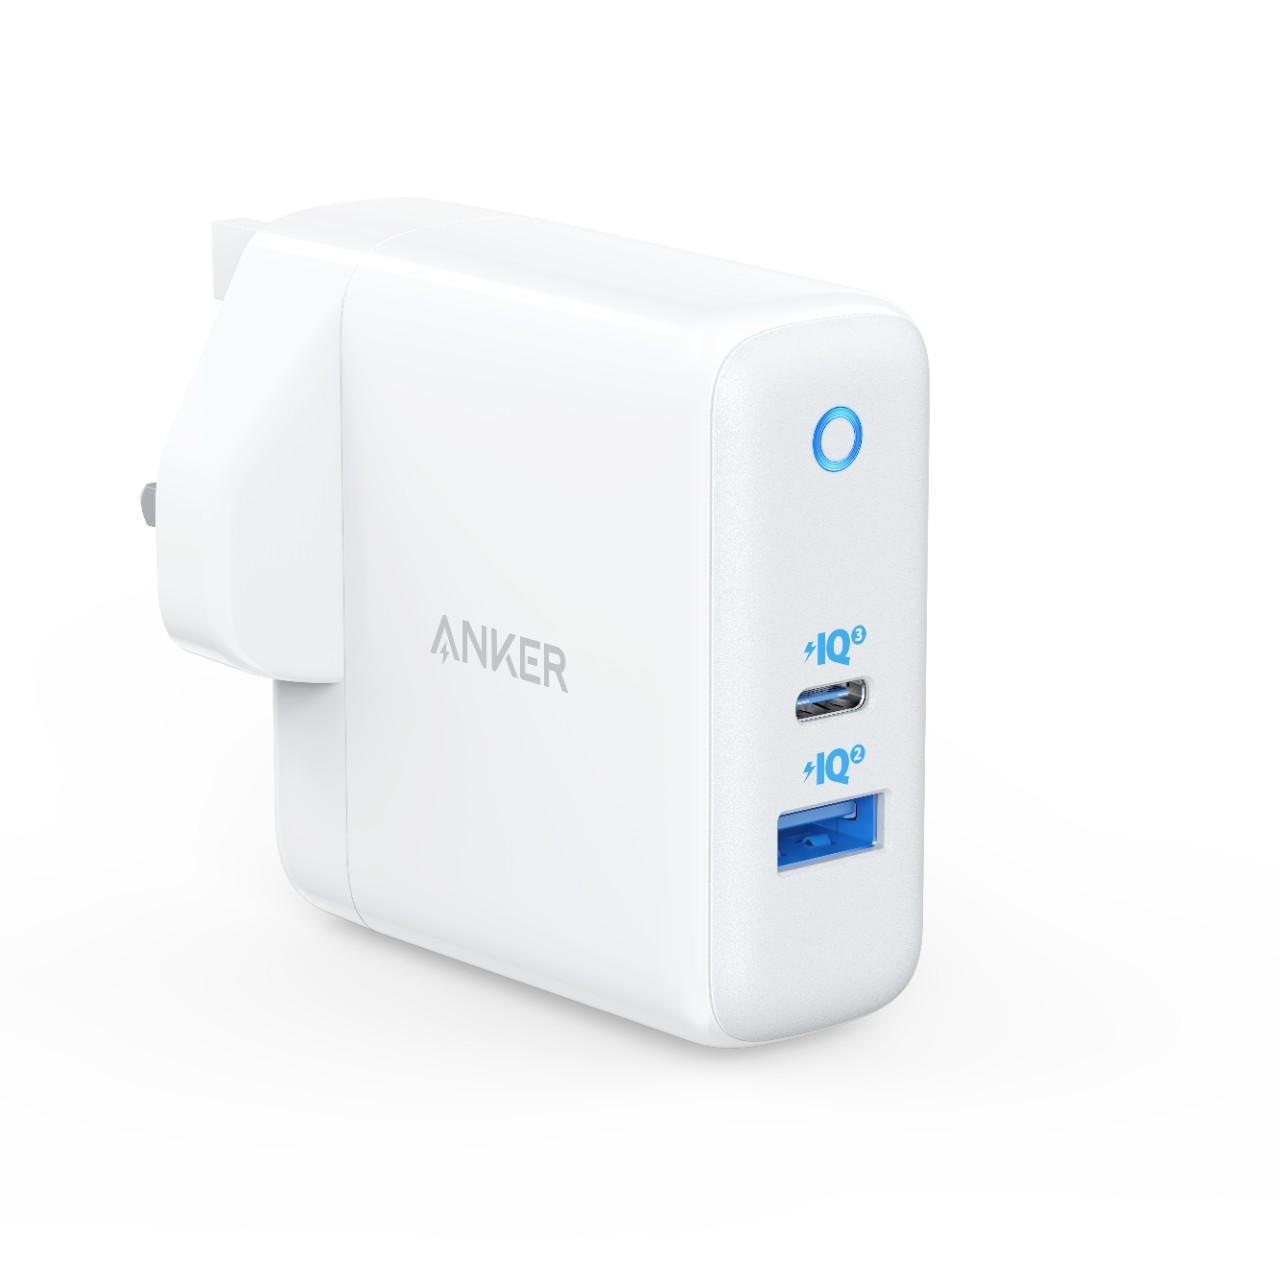 Anker PowerPort Atom III (Two Ports) with iQ 3.0  - White